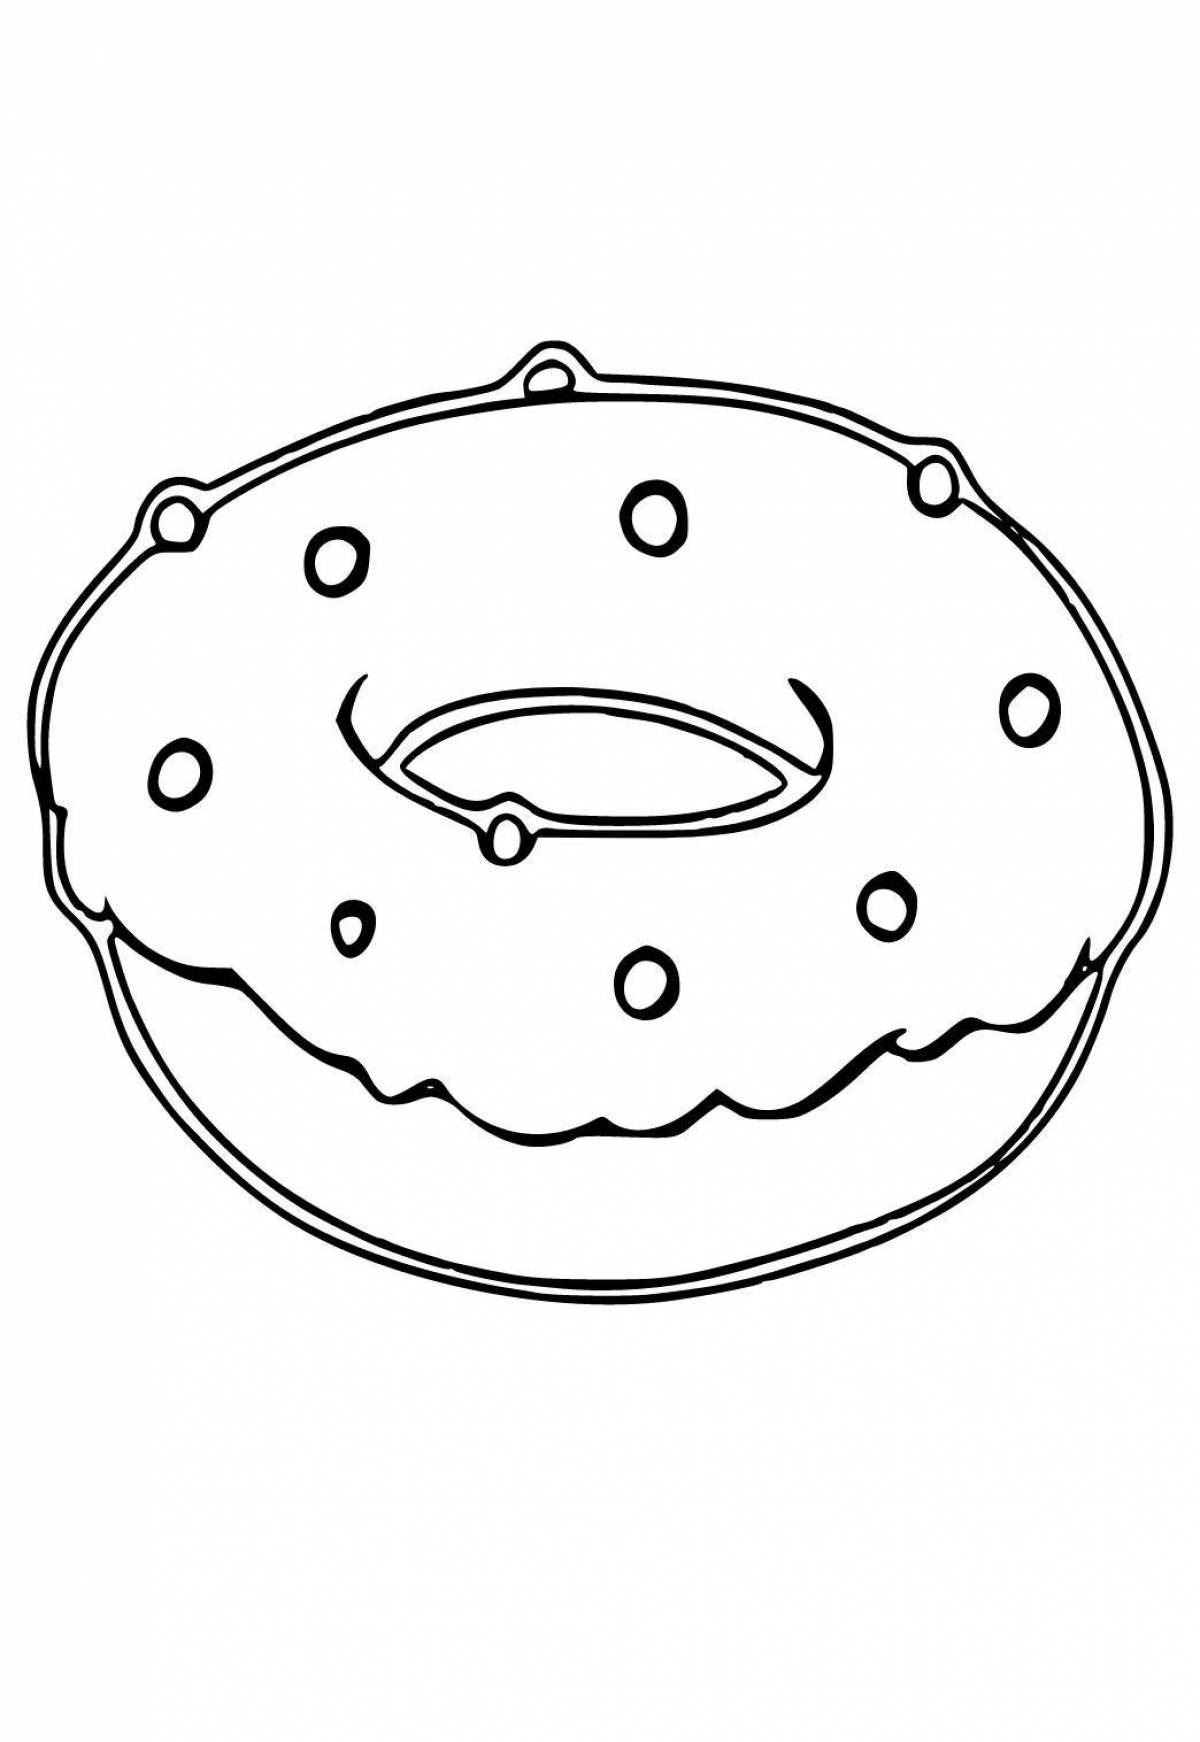 Sunny donut coloring page for girls